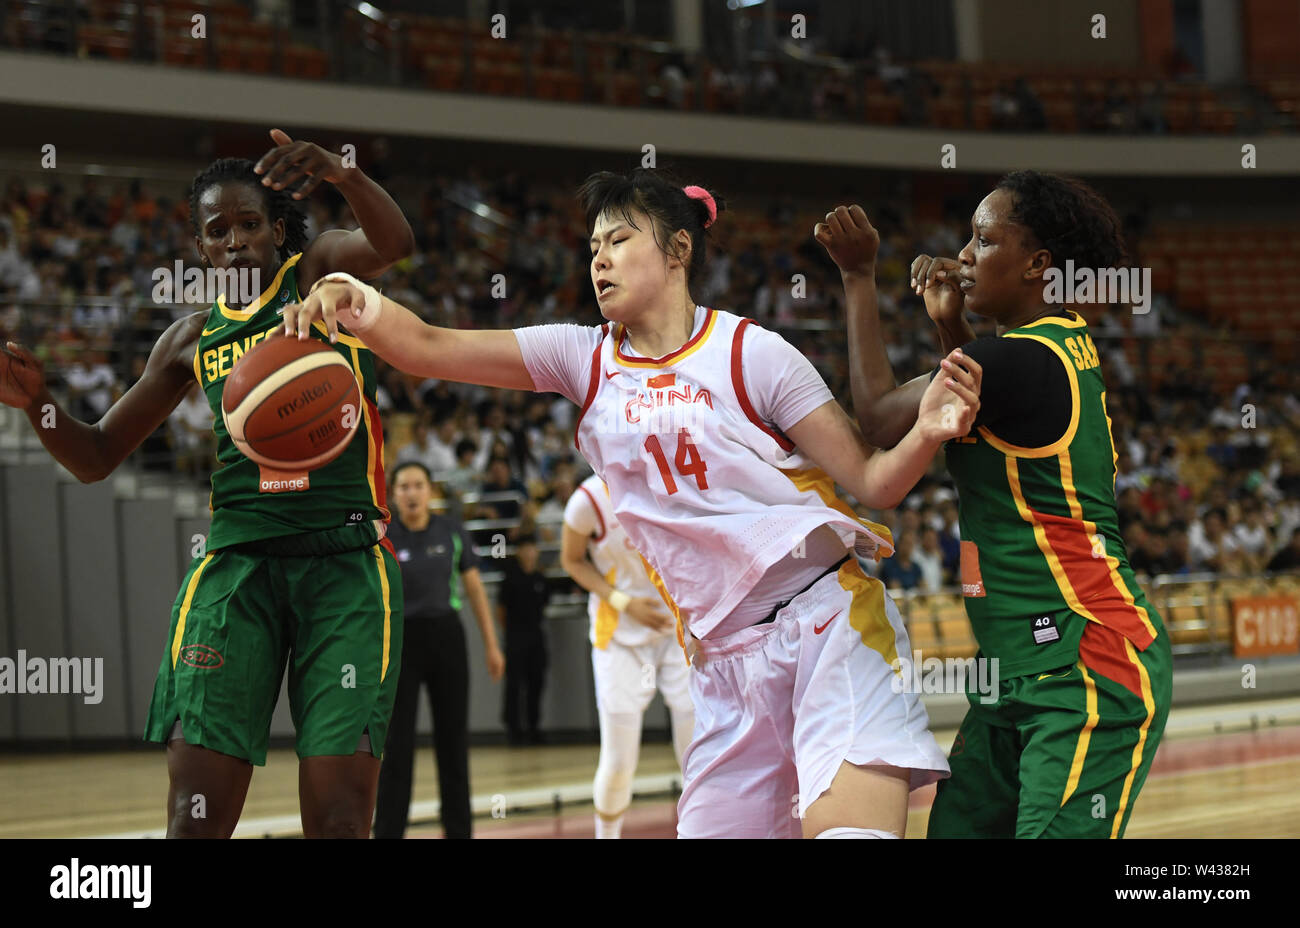 Wuhan. 19th July, 2019. Li Yueru (C) of China competes during 2019 International Women's Basketball Chanllenge between China and Senegal in Wuhan, central China's Hubei Province on July 19, 2019. Credit: Cheng Min/Xinhua/Alamy Live News Stock Photo